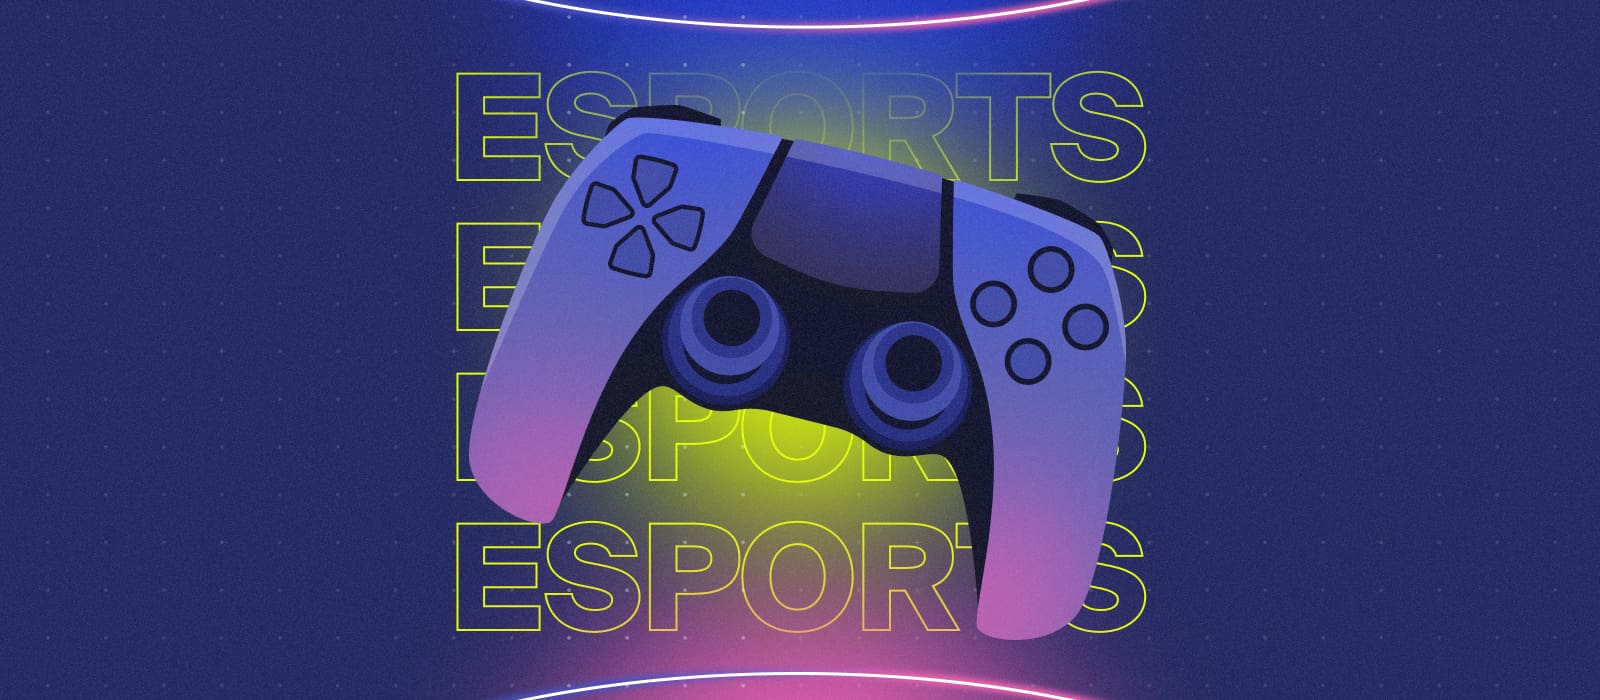 A gamepad on the background of an esports sign